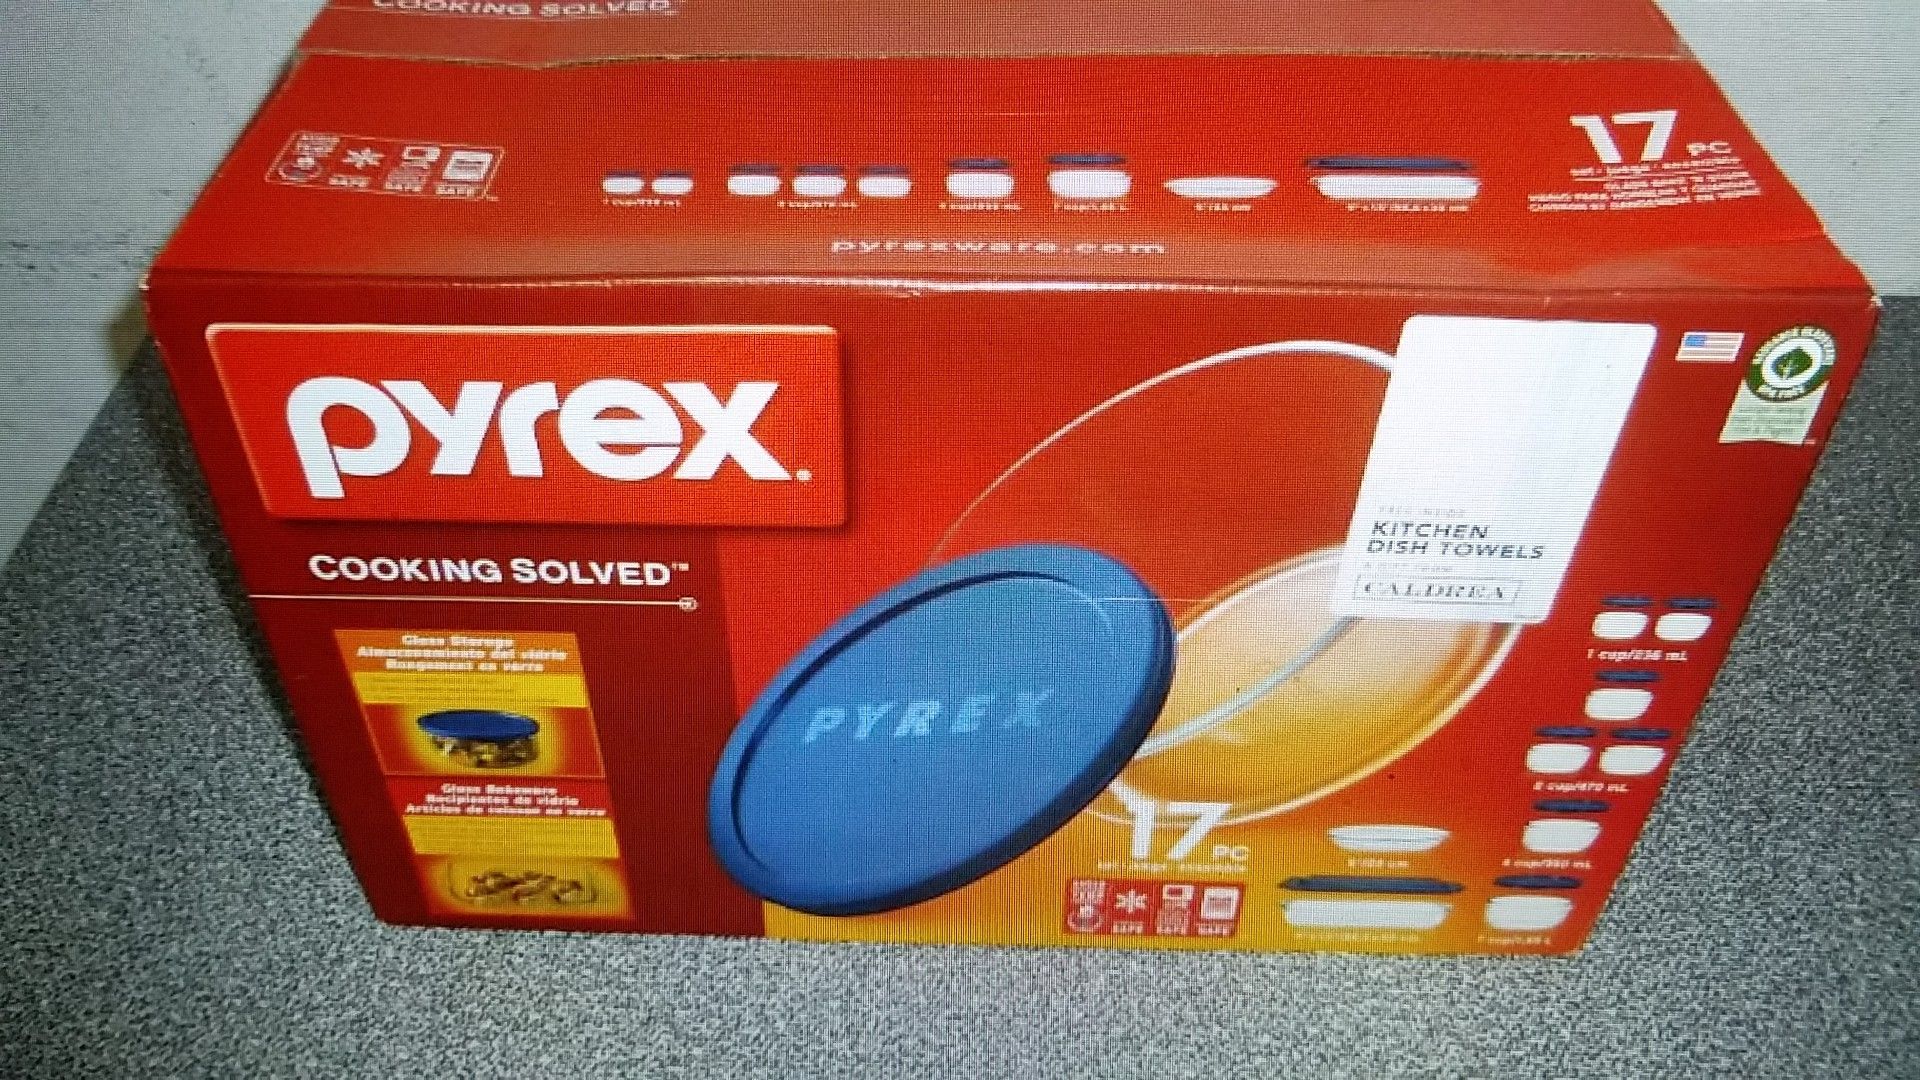 17 piece Pyrex clear glass cooking set new in box